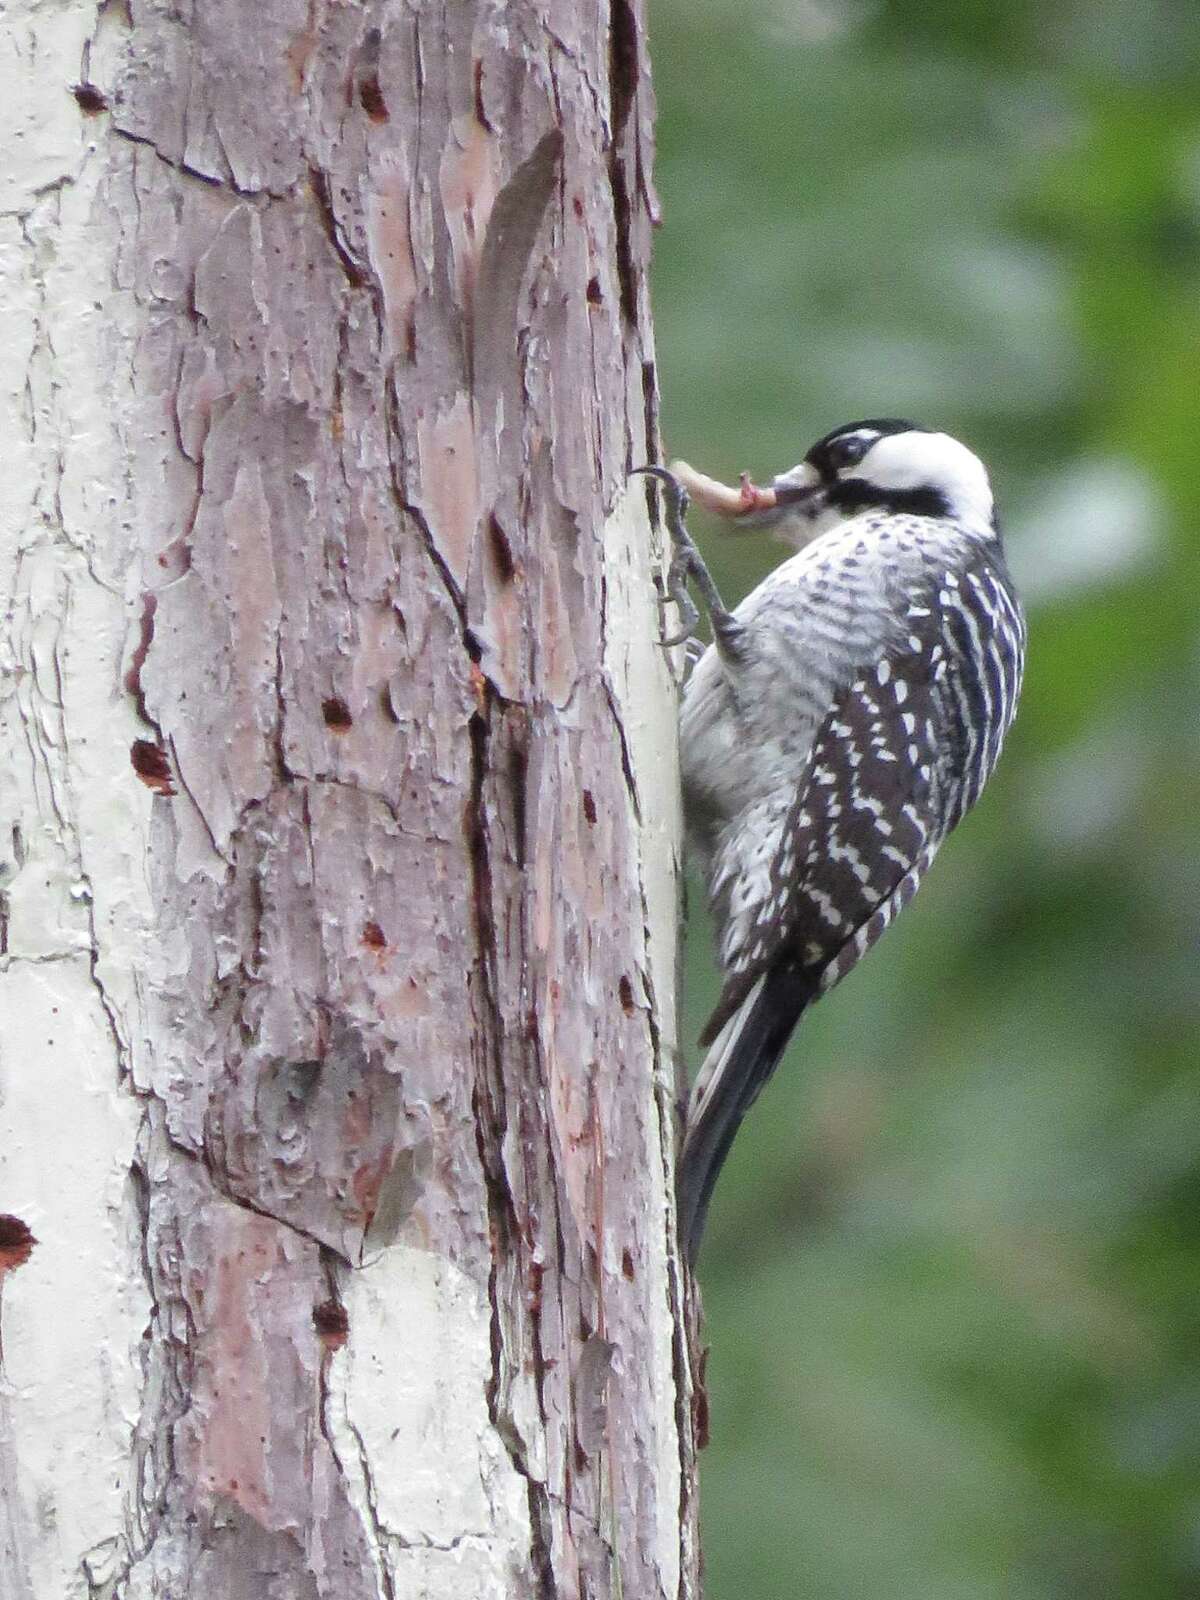 The Texas A& Forest Service announced it has received two pairs of unrelated Red-Cockaded Woodpeckers, which can now call Jones State Forest in Conroe home.